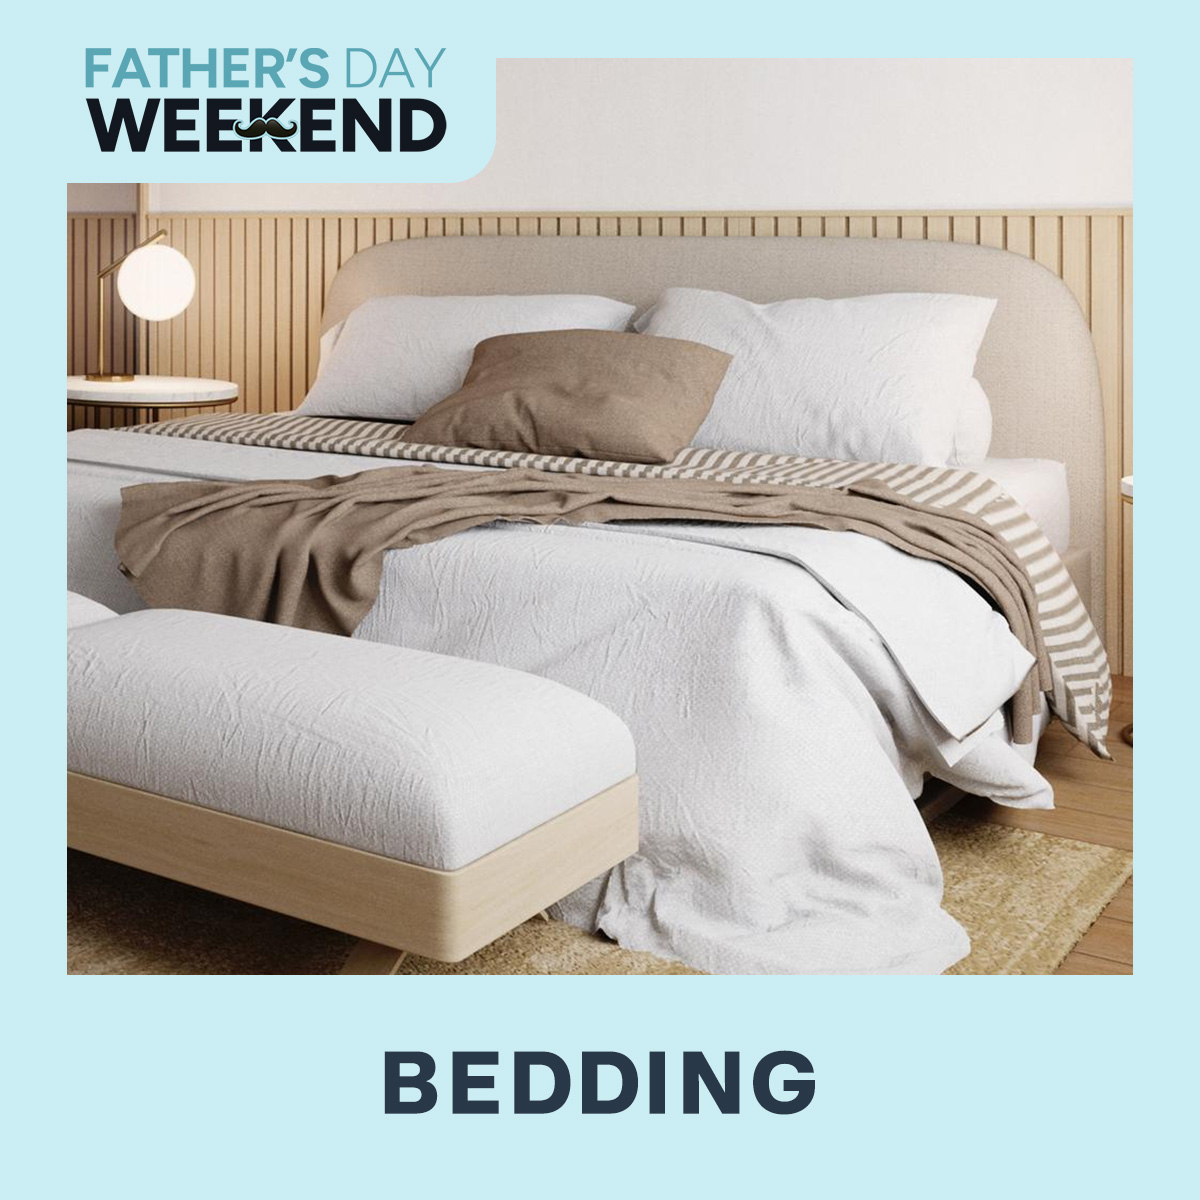 Father's Day Bedding Weekend